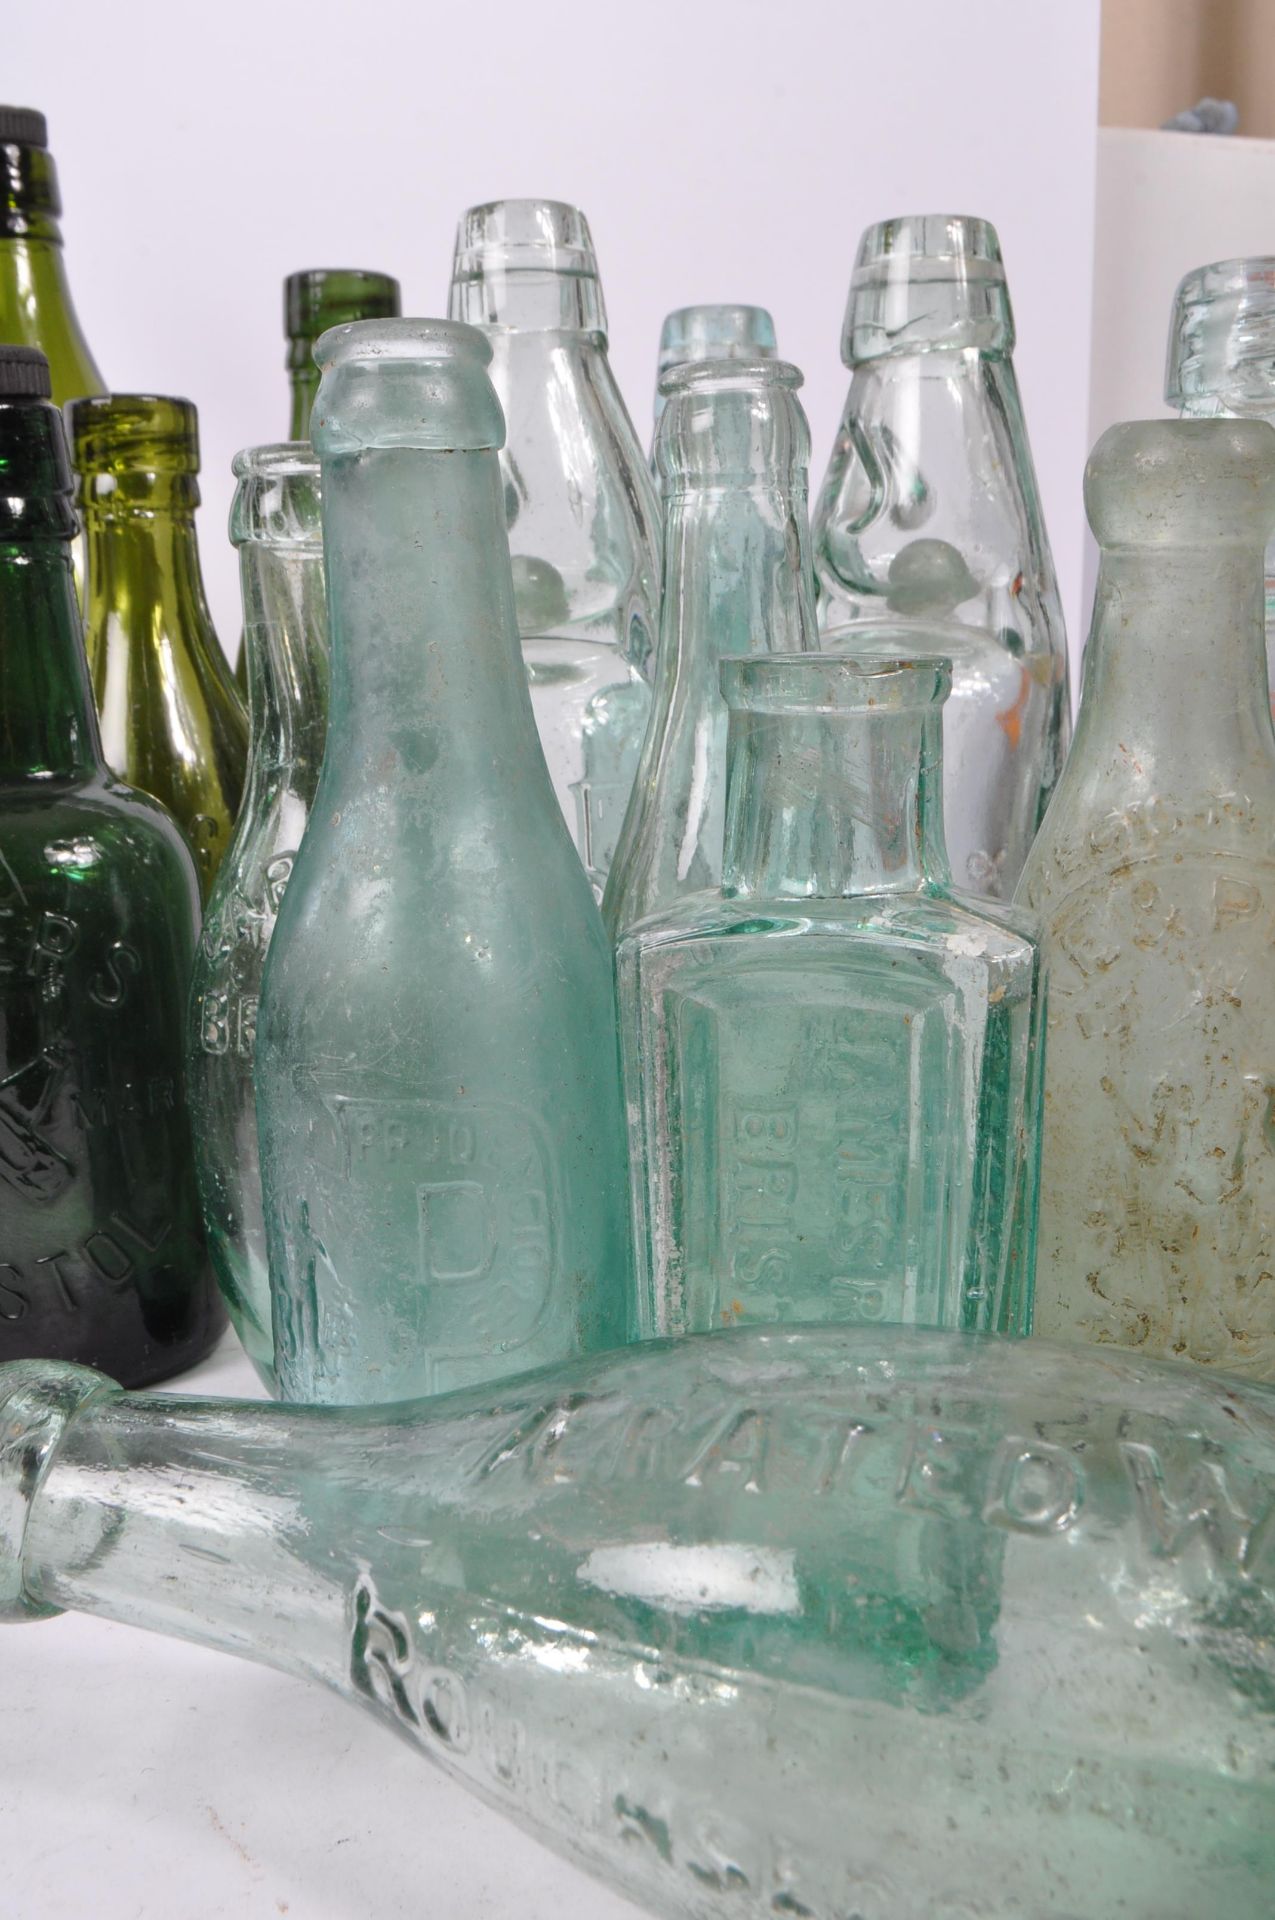 LARGE COLLECTION OF BRISTOL BREWERY GLASS BOTTLES - Image 6 of 6